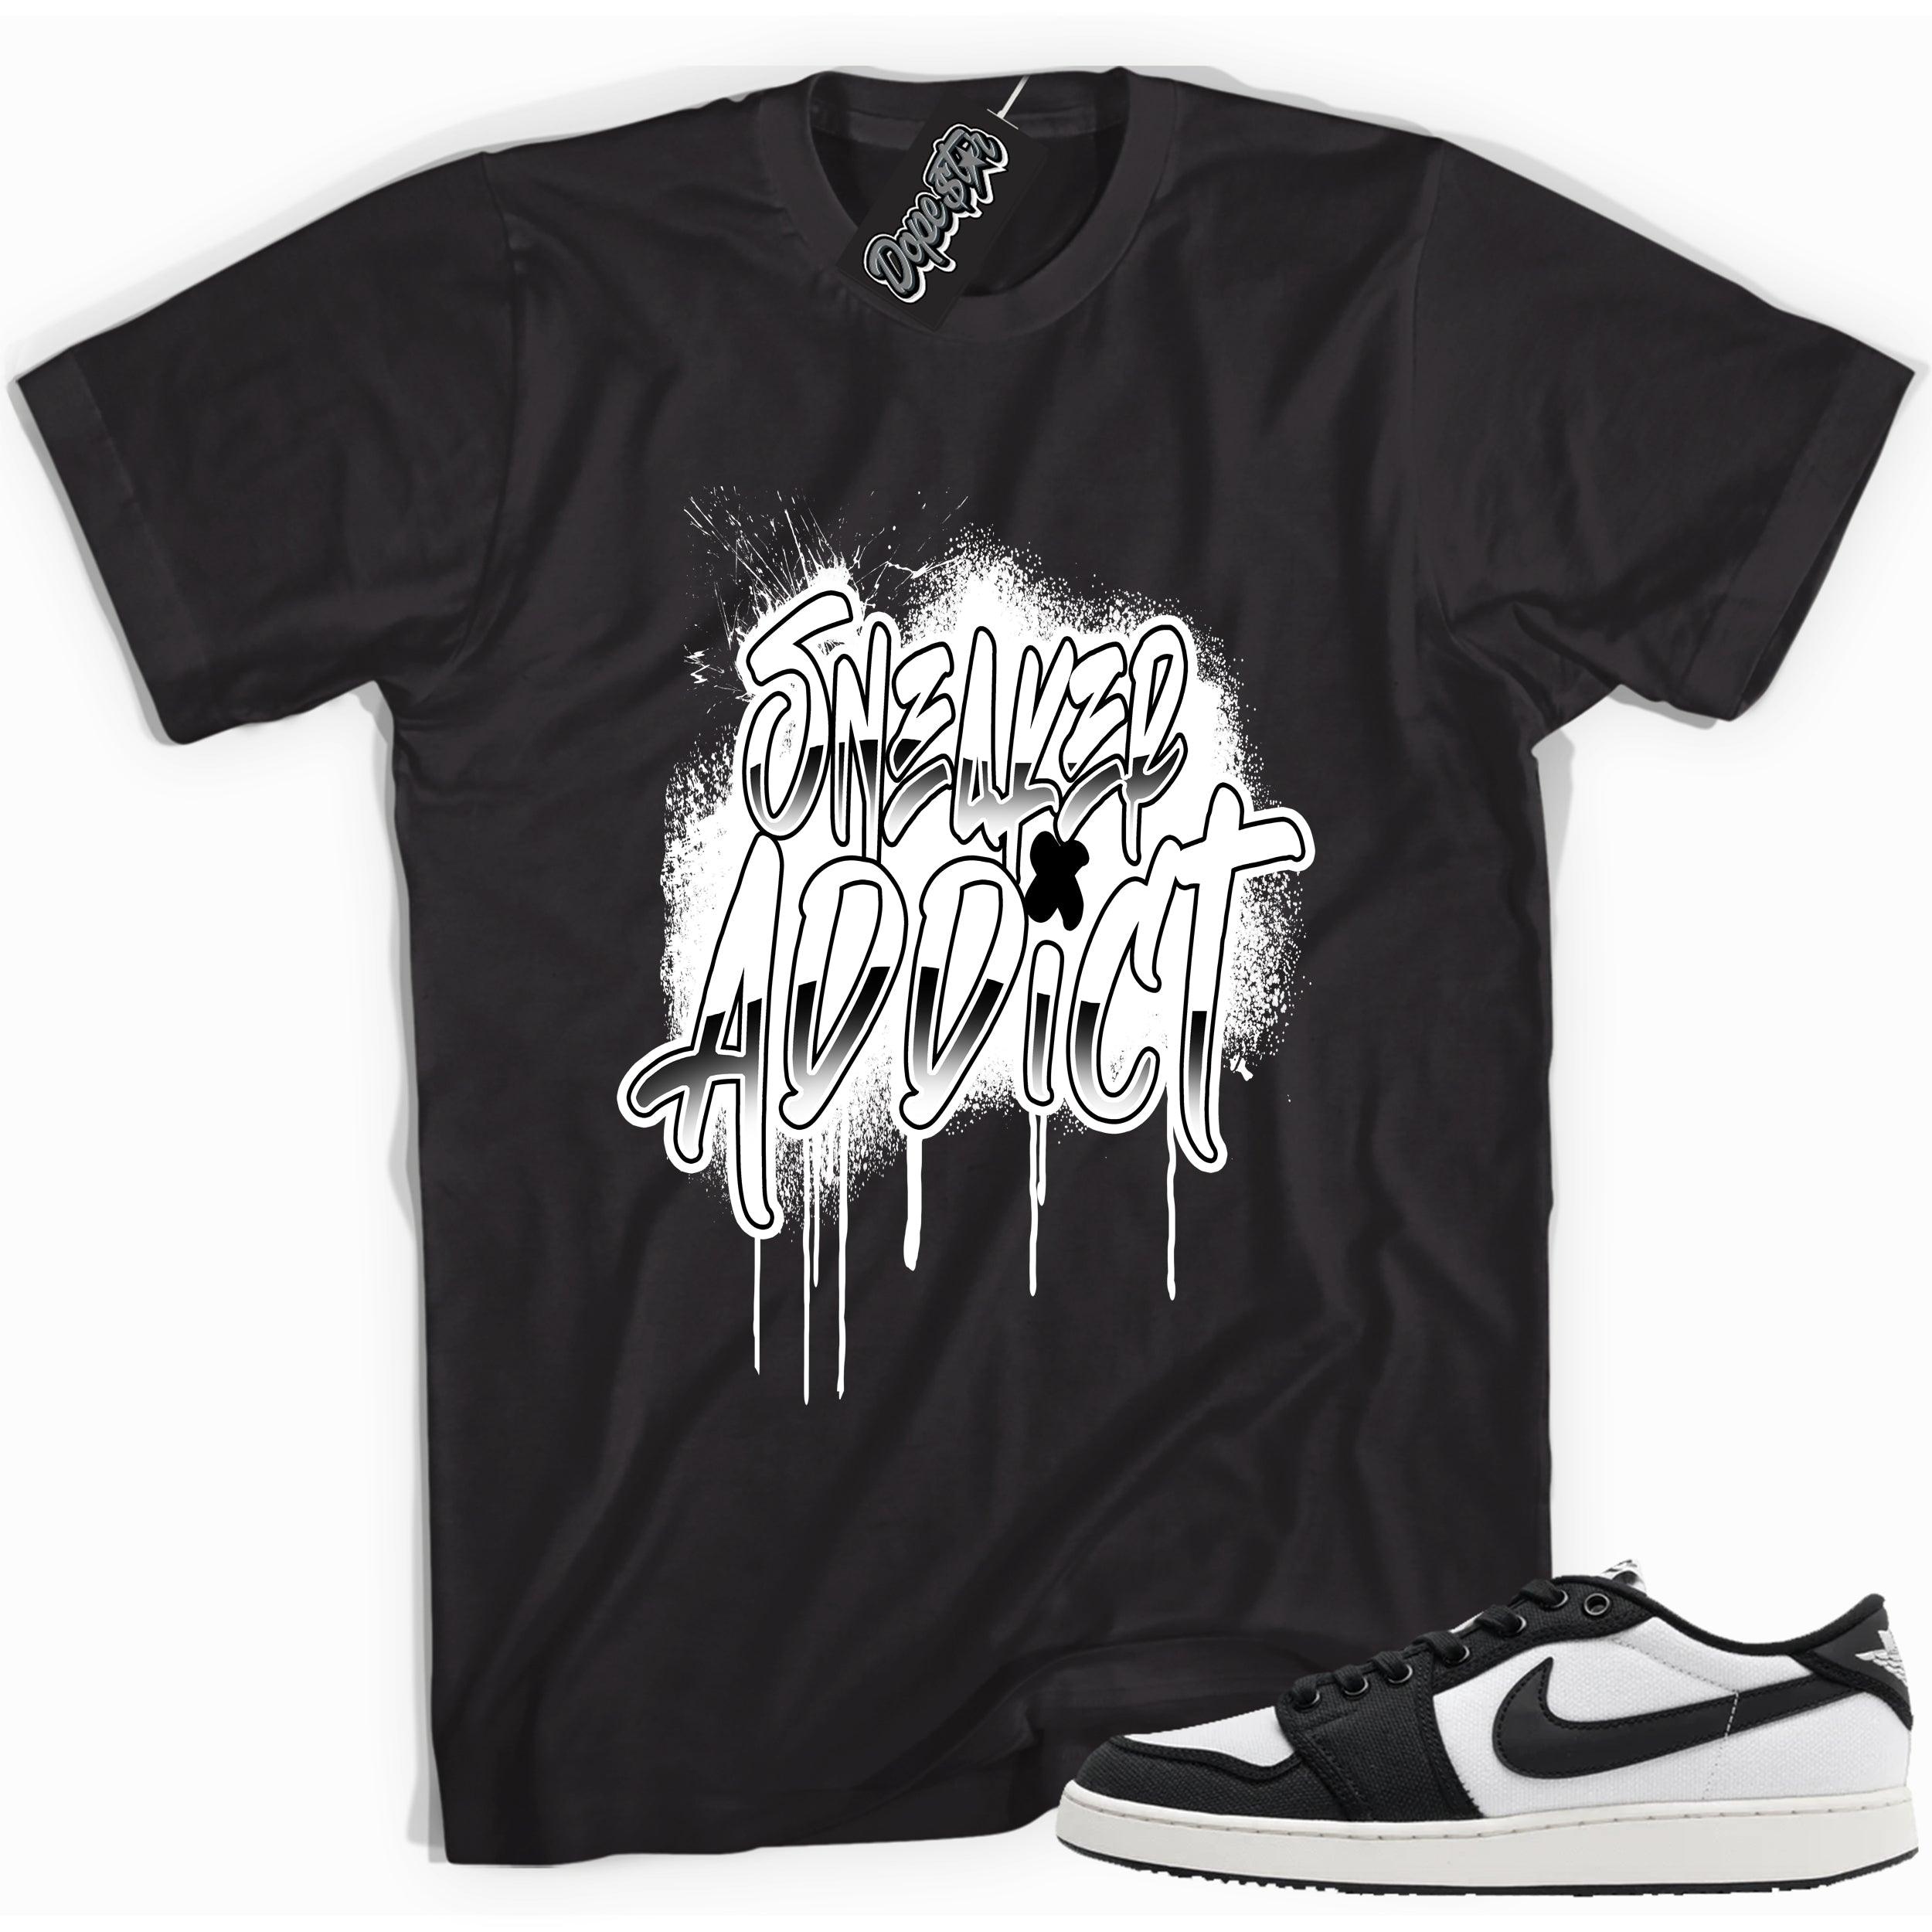 Cool black graphic tee with 'sneaker addict' print, that perfectly matches Air Jordan 1 Retro Ajko Low Black & White sneakers.